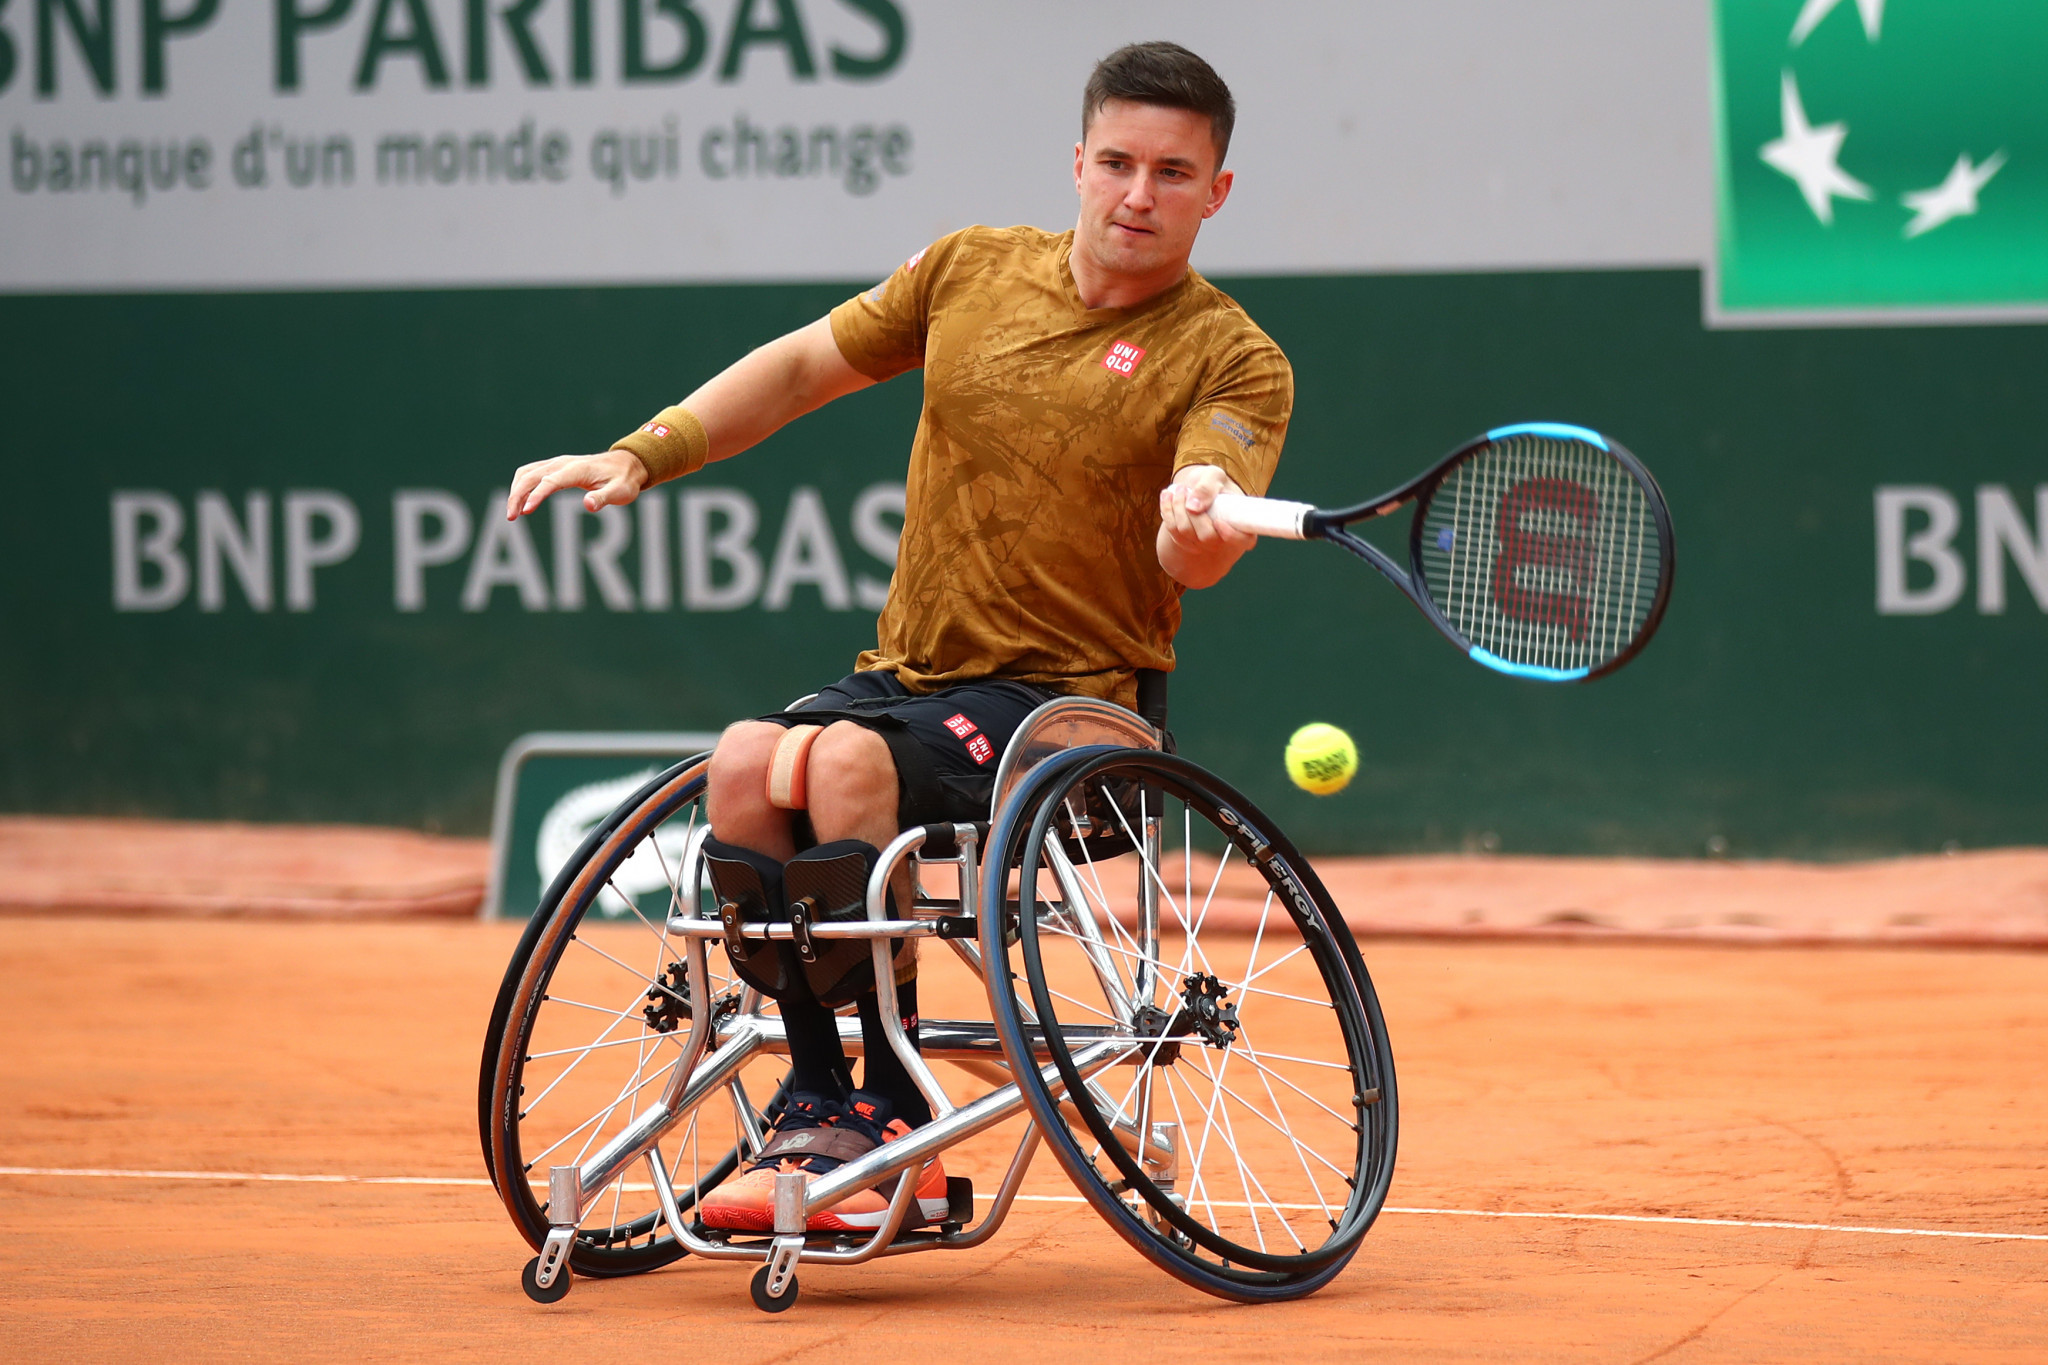 Britain’s Gordon Reid beat third-seeded home favourite Stéphane Houdet in three sets today to progress to the men’s singles semi-finals at the BNP Paribas Open de France in Paris ©Getty Images